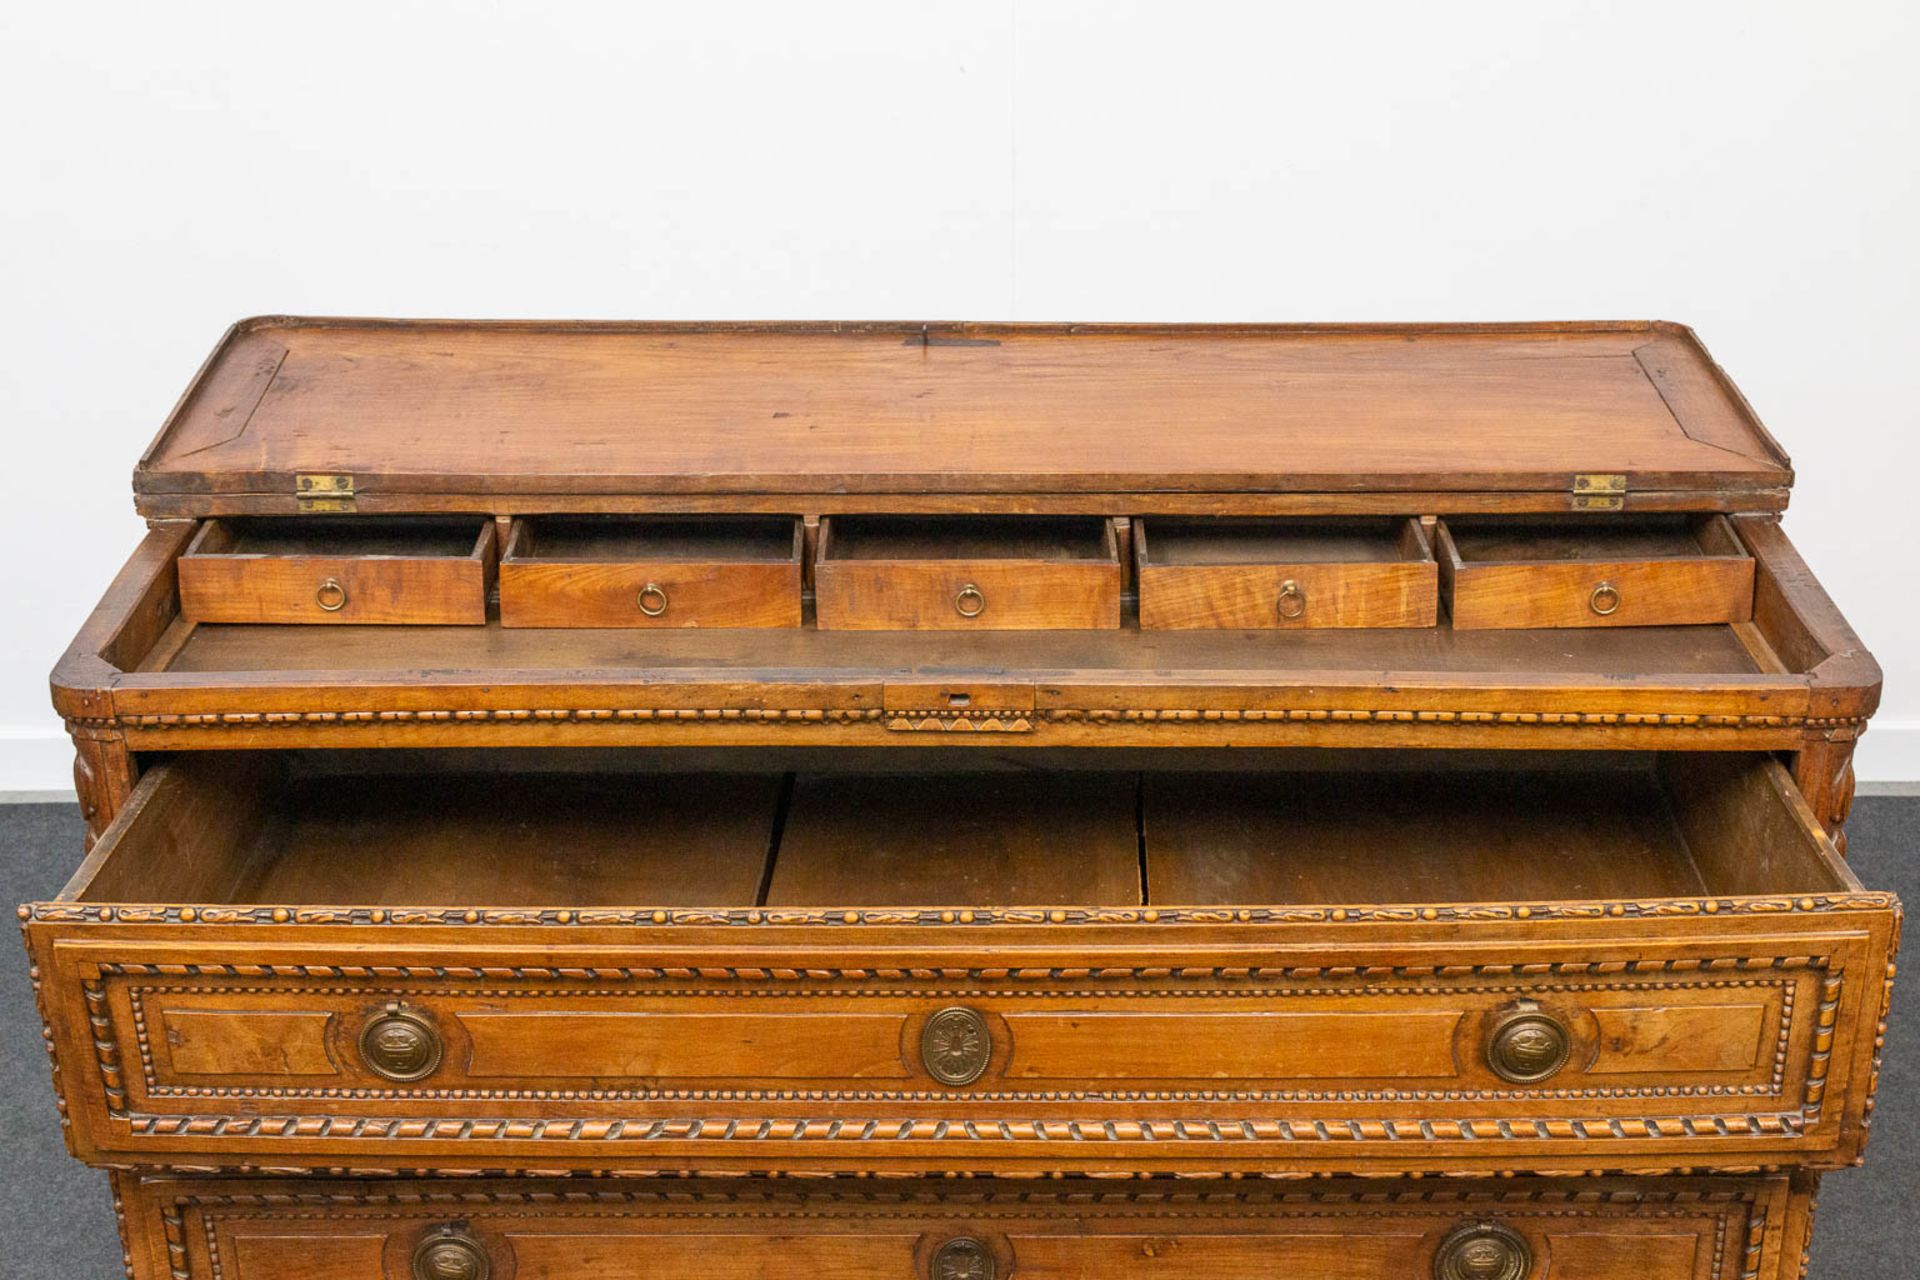 A wood sculptured commode in Louis XVI style, with 3 drawers and a hidden desk. 18th century. - Image 11 of 23